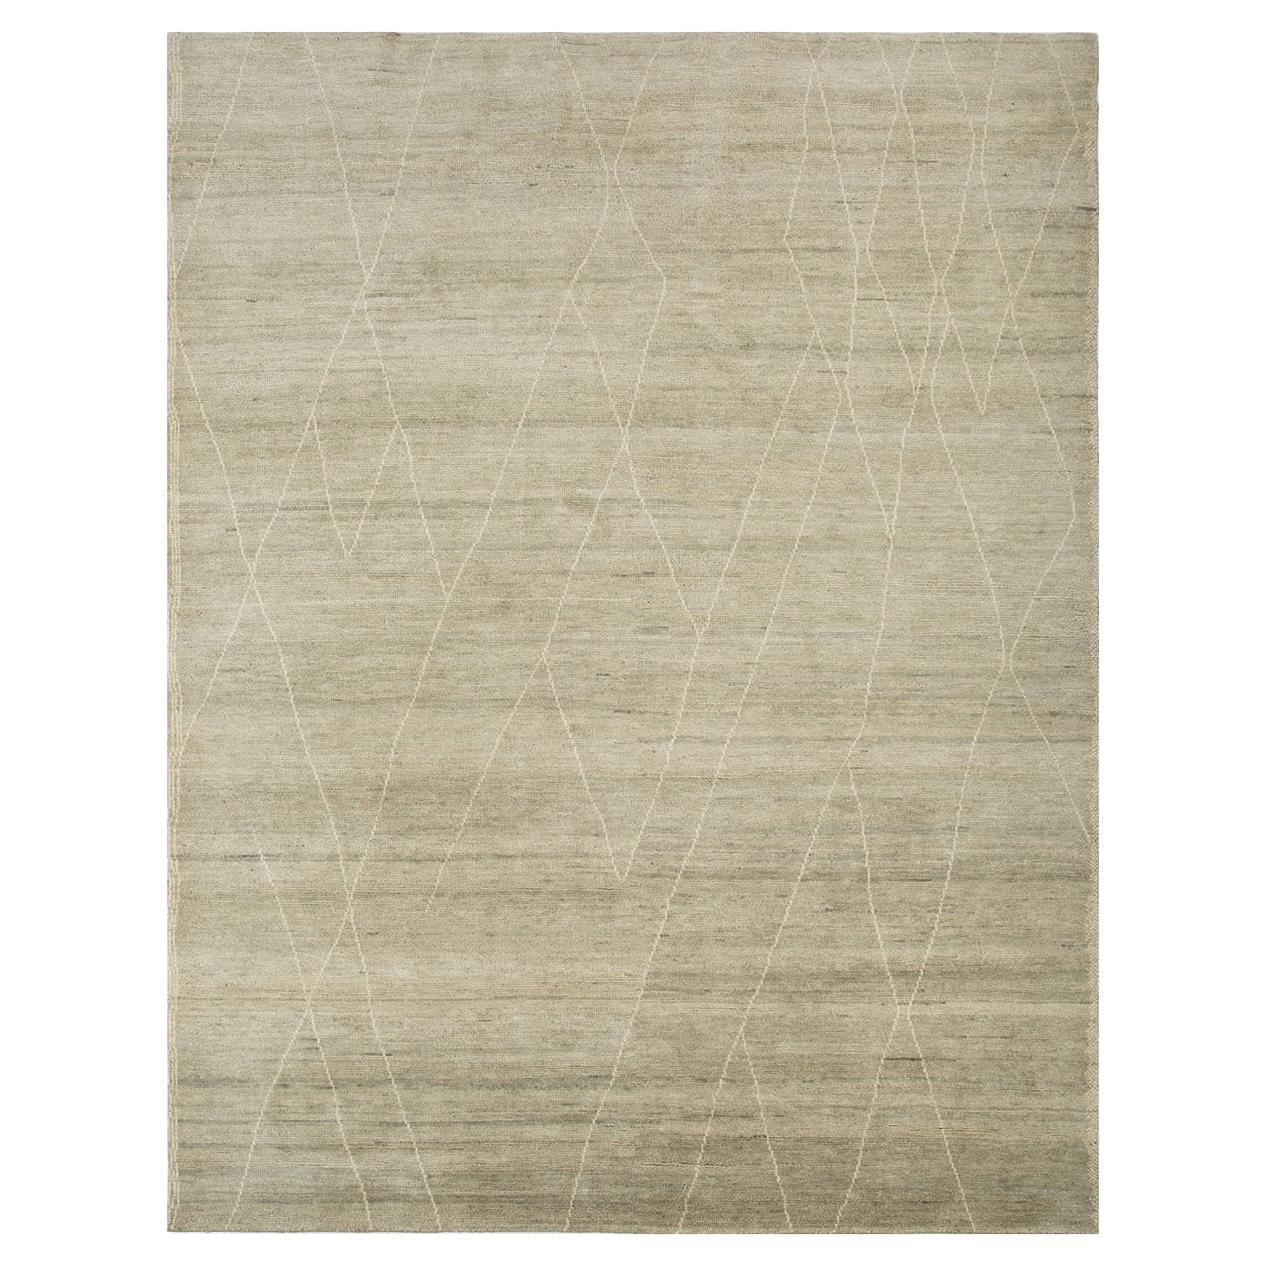 Taup Rug by Rural Weavers, Knotted, Wool, 240x300cm For Sale